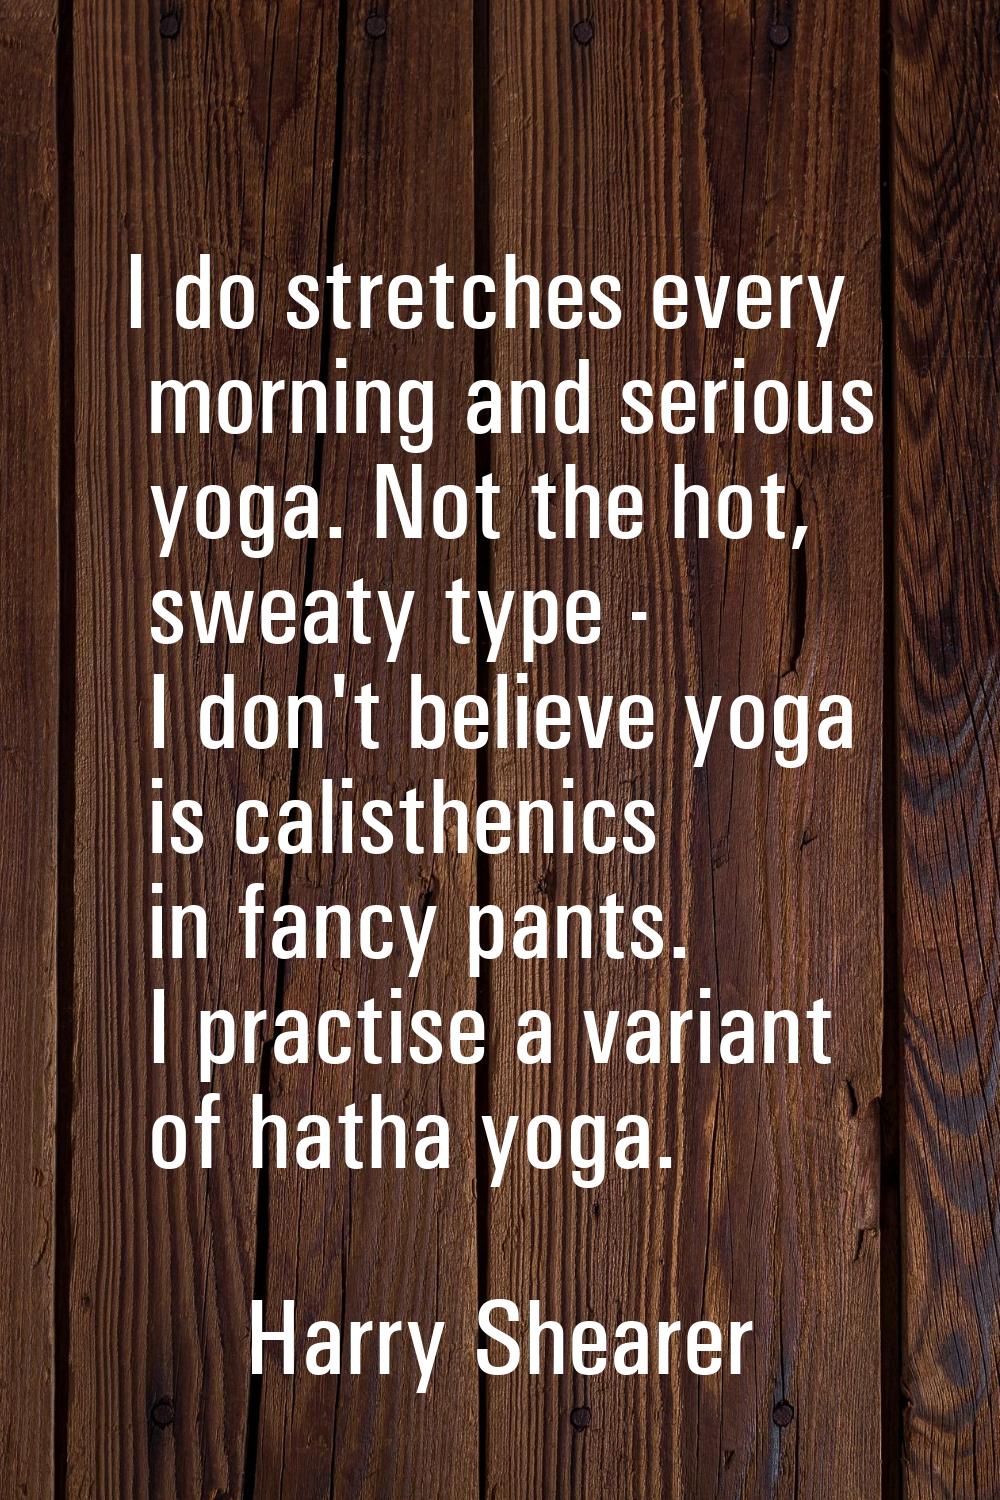 I do stretches every morning and serious yoga. Not the hot, sweaty type - I don't believe yoga is c